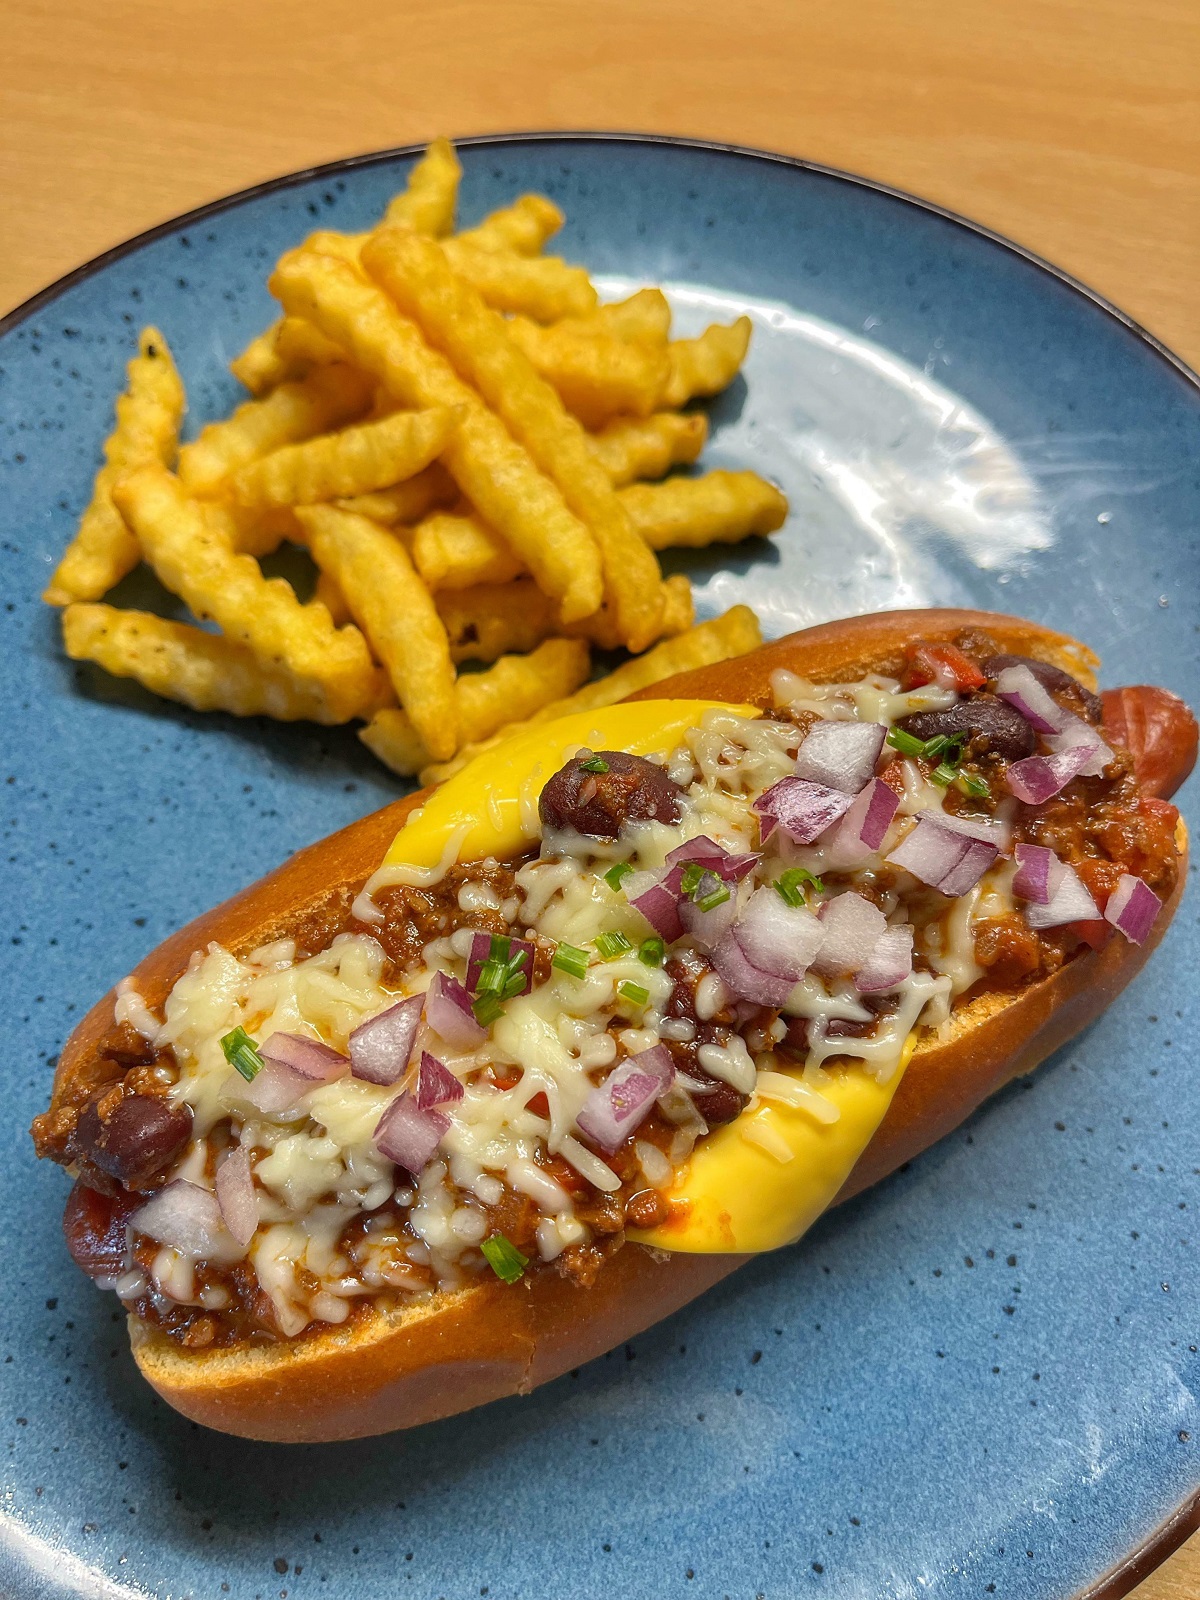 I Made My BF His First Chili Cheese Dog